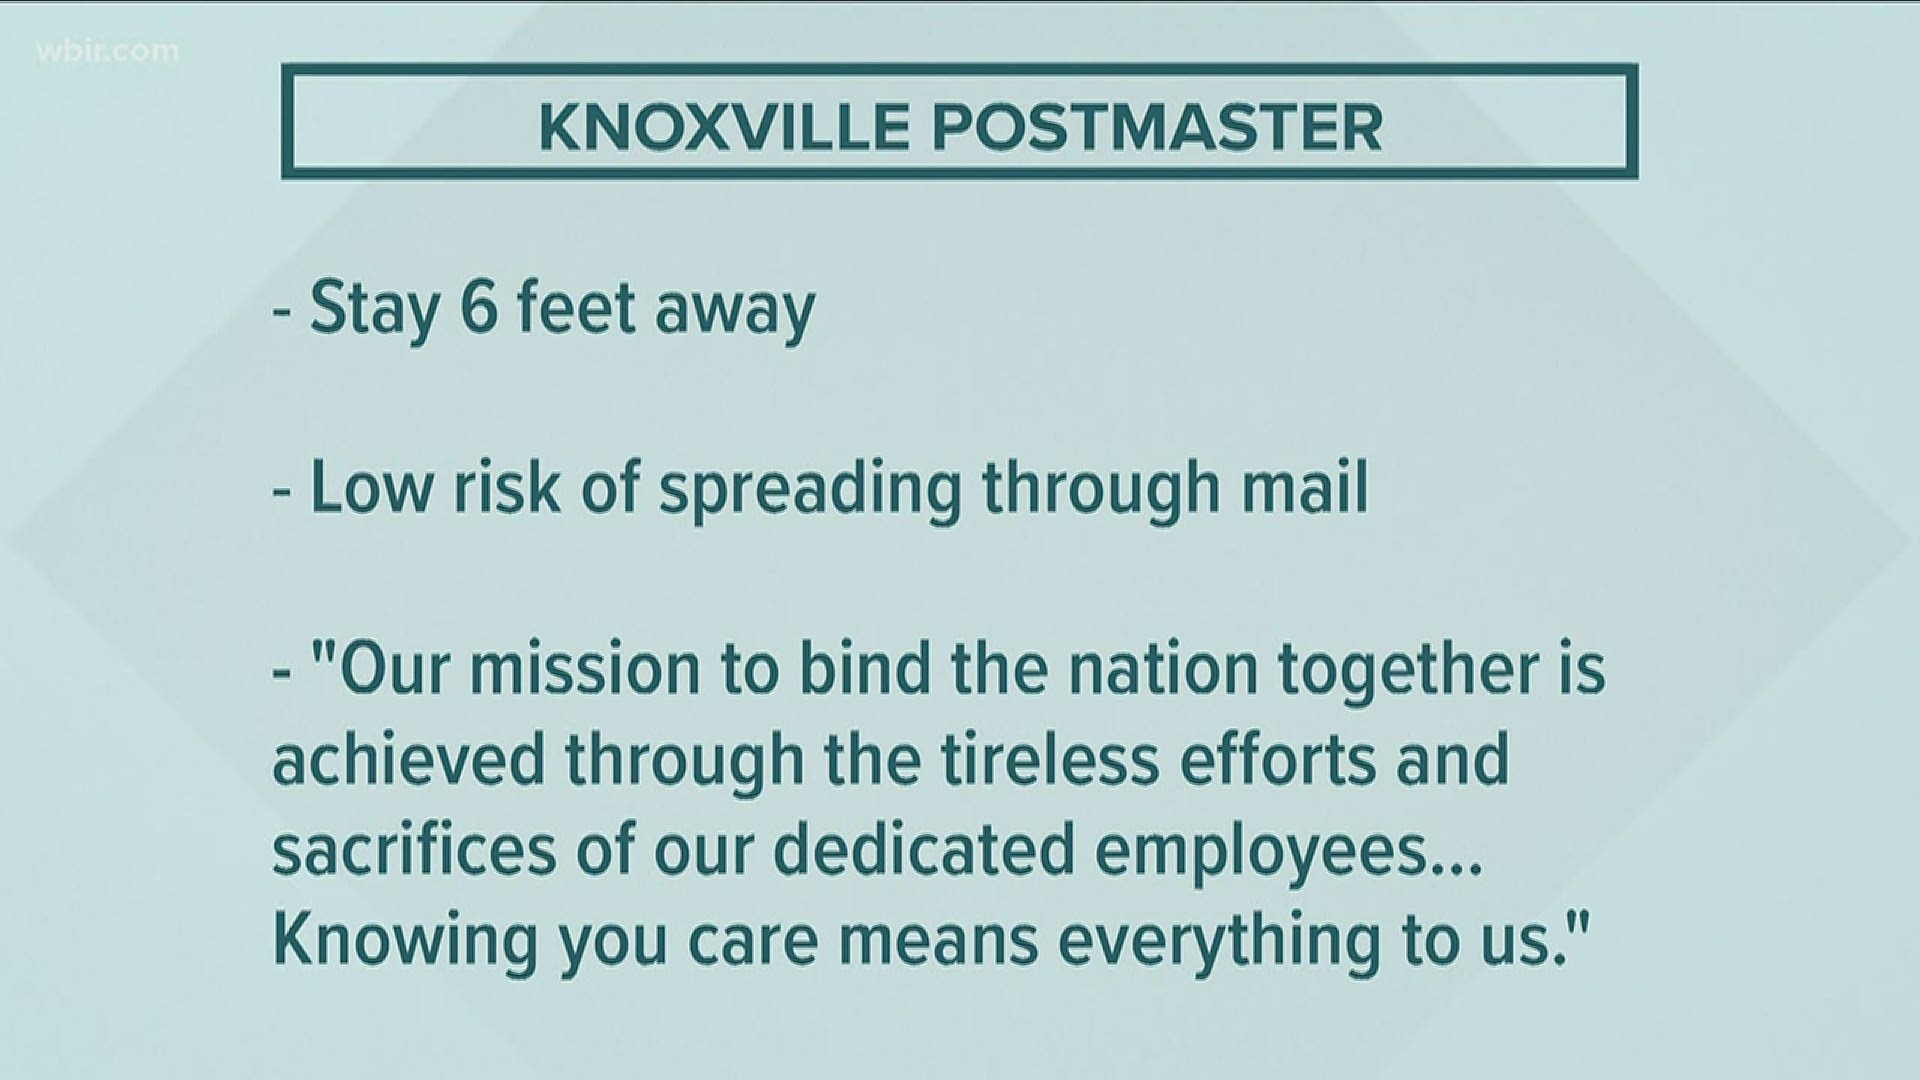 The Knoxville postmaster ASKS PEOPLE TO PLEASE STAY AT LEAST 6 FEET AWAY FROM MAIL CARRIERS OR WORKERS INSIDE THE POST OFFICE.